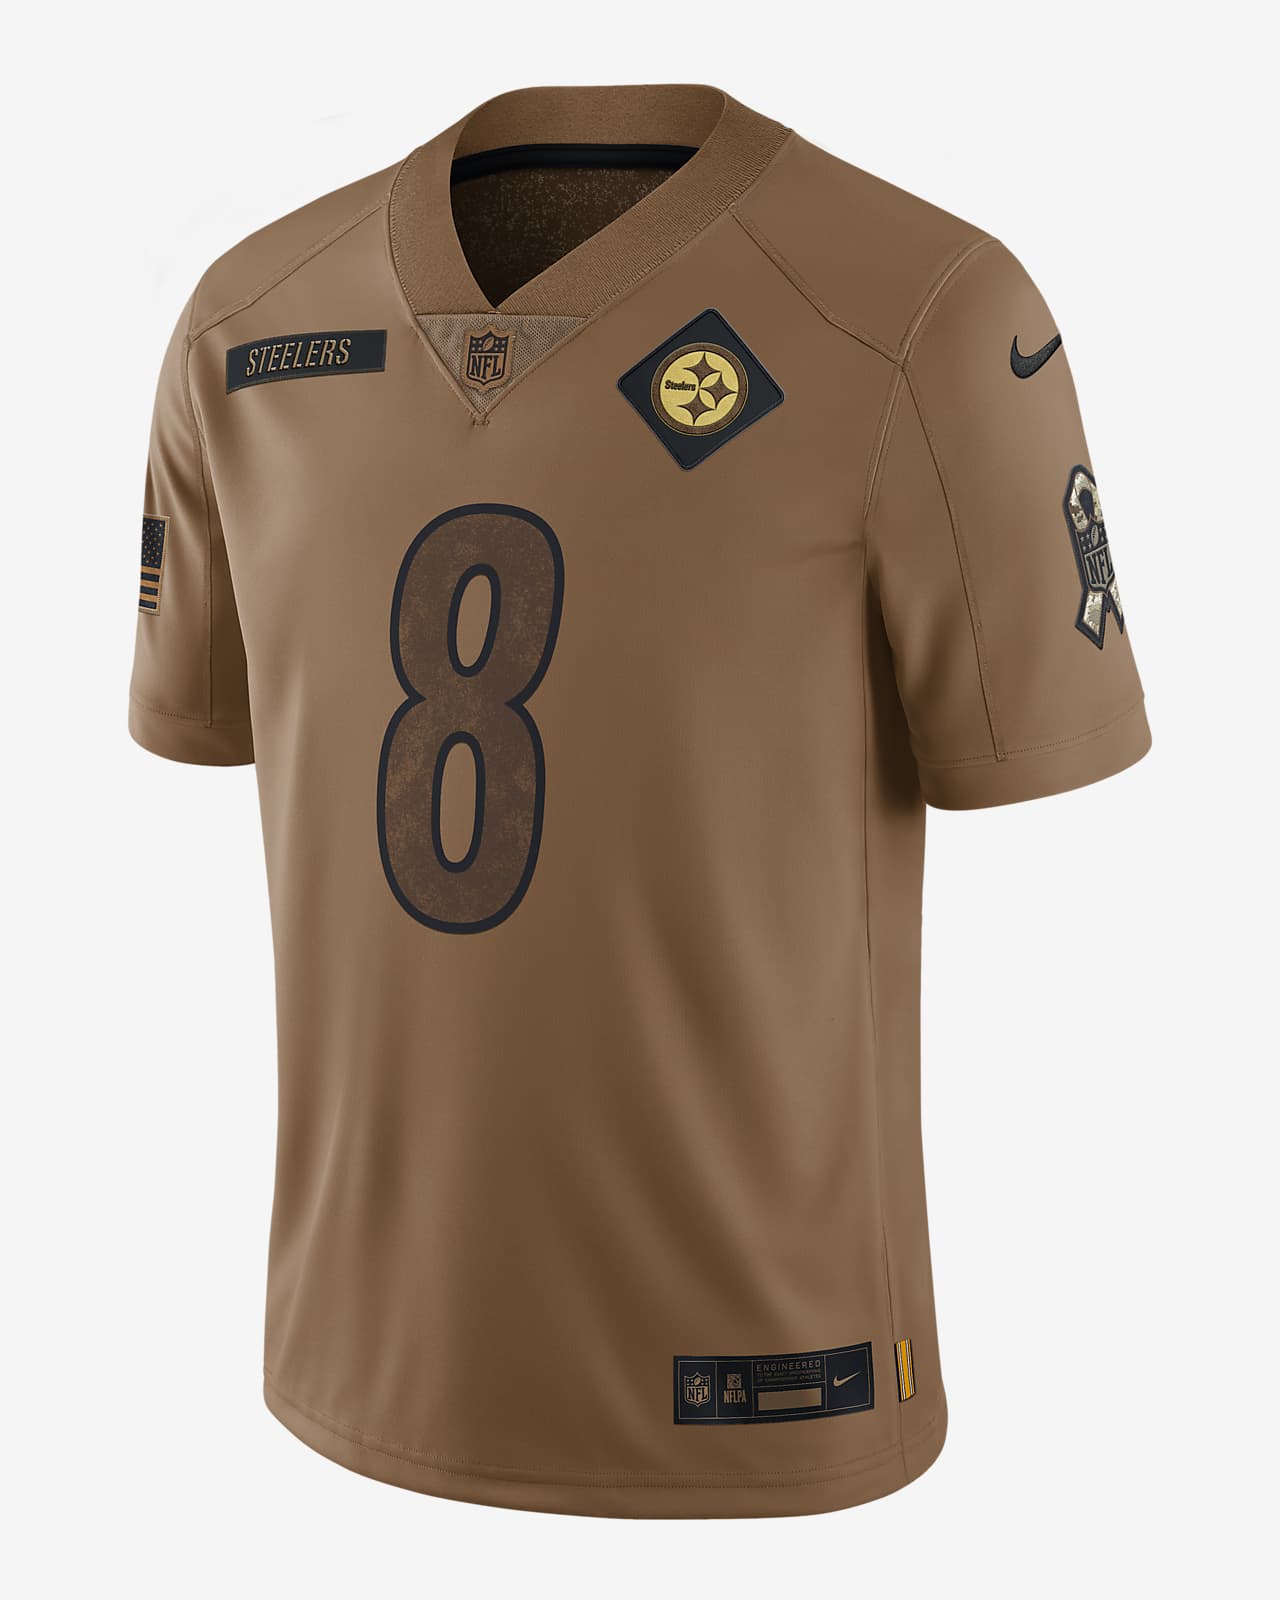 Jersey Nike Dri-FIT Limited de la NFL para hombre Kenny Pickett Pittsburgh Steelers Salute to Service